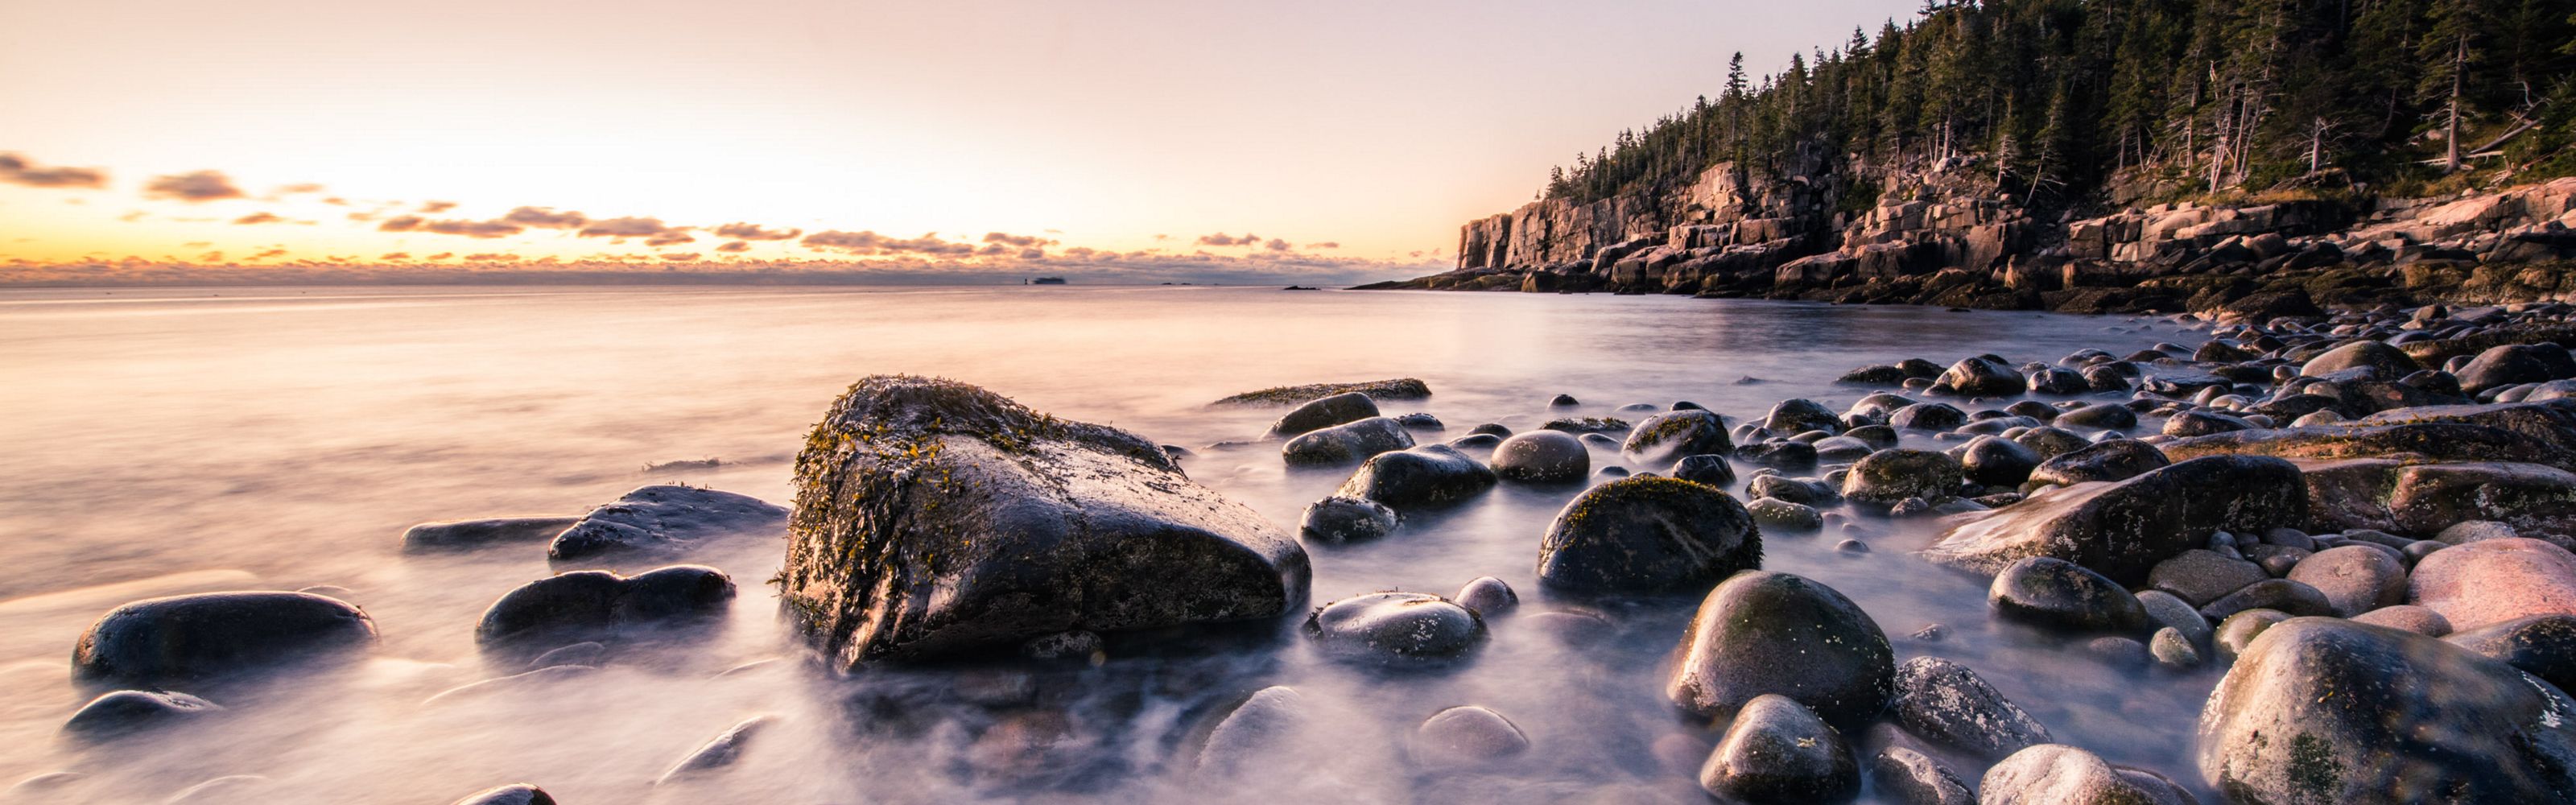 Dawn light over boulders along rugged coastline with cliffs and forest in background.